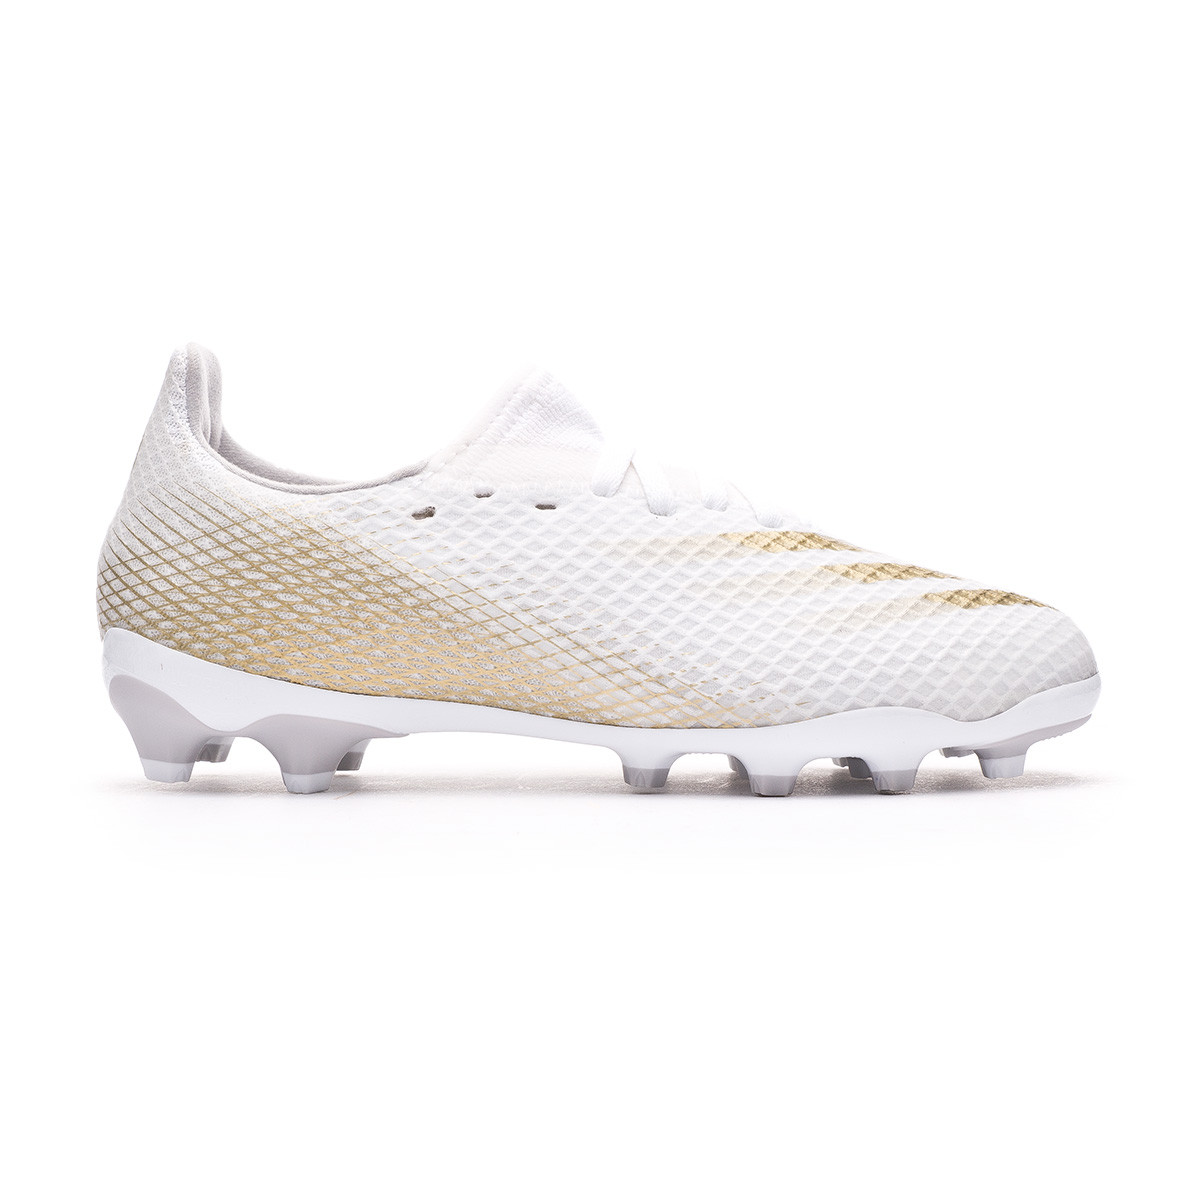 Football Boots adidas X Ghosted.3 MG 